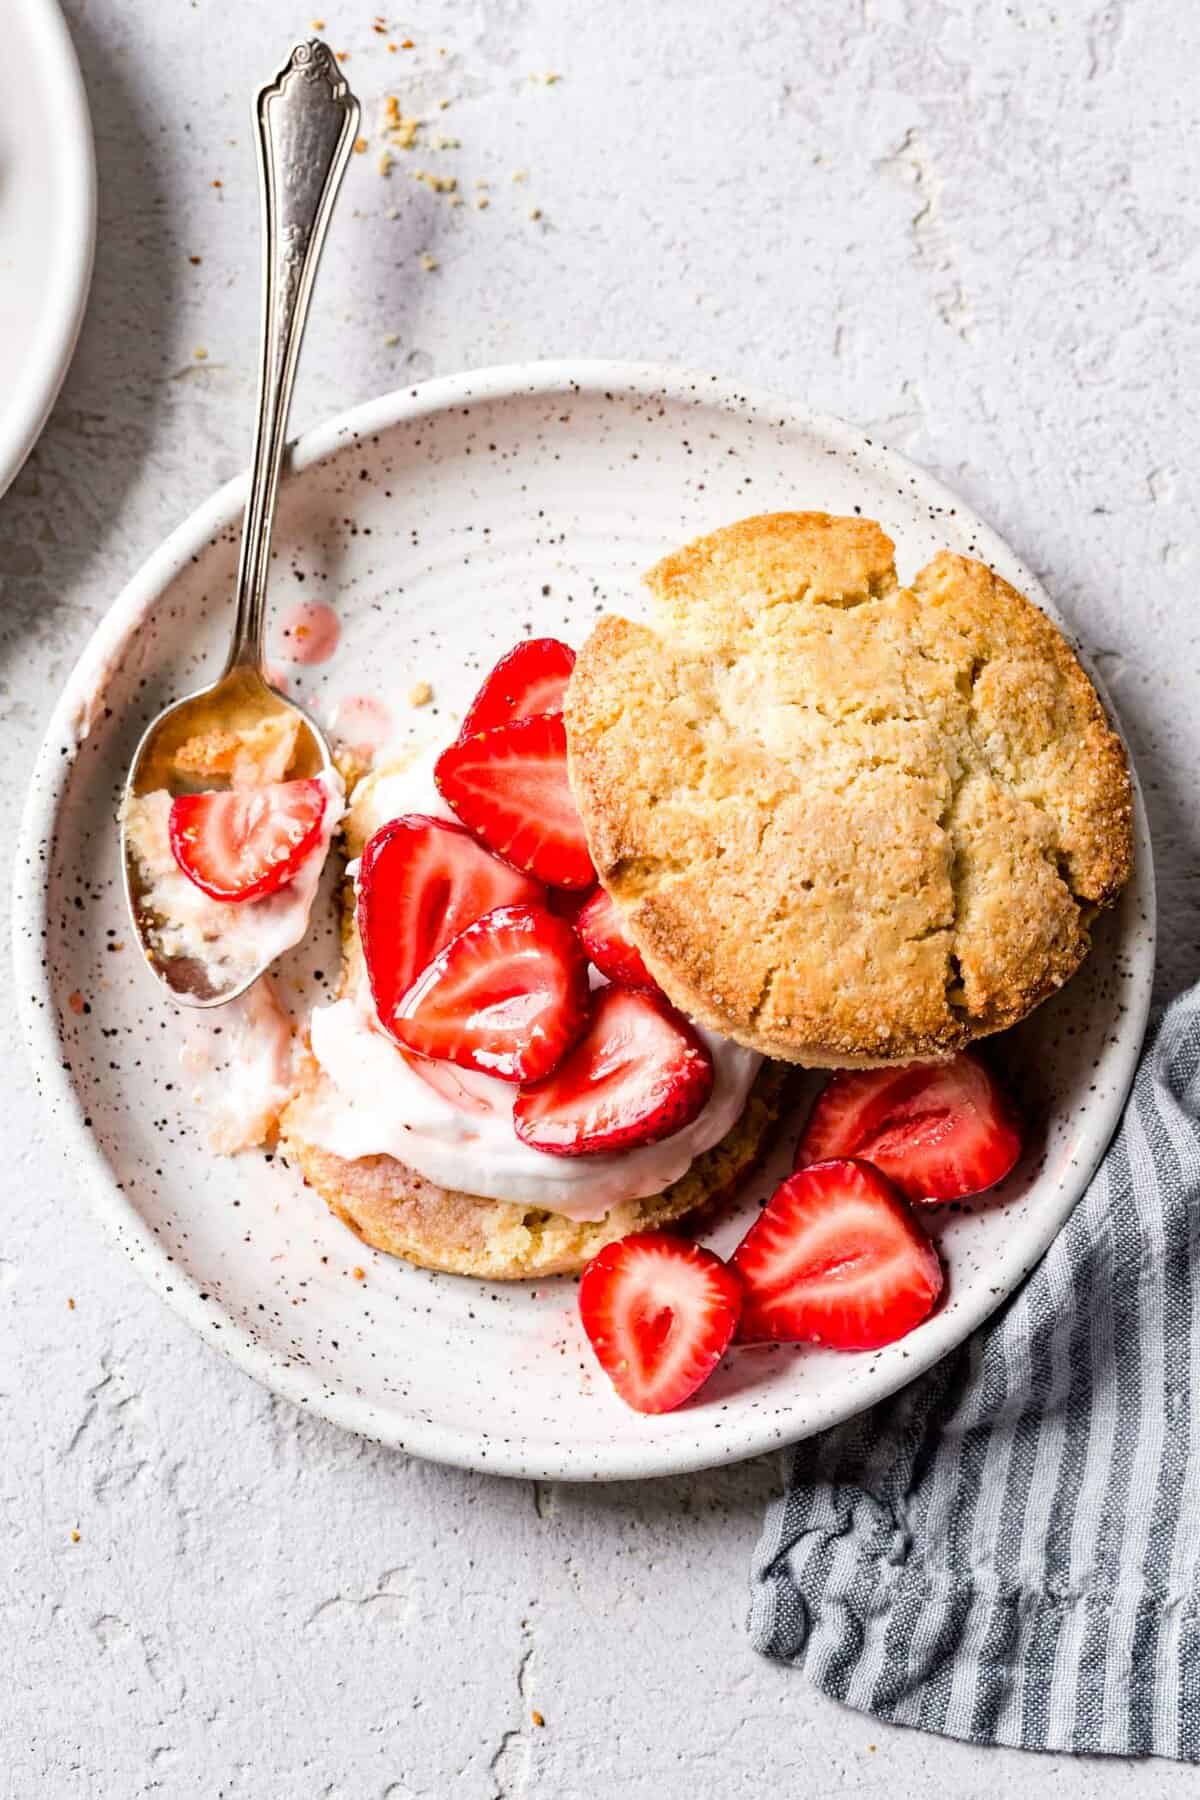 A gluten-free strawberry shortcake sits on a speckled plate with a spoonful taken out in a way that makes you want to dive right in!